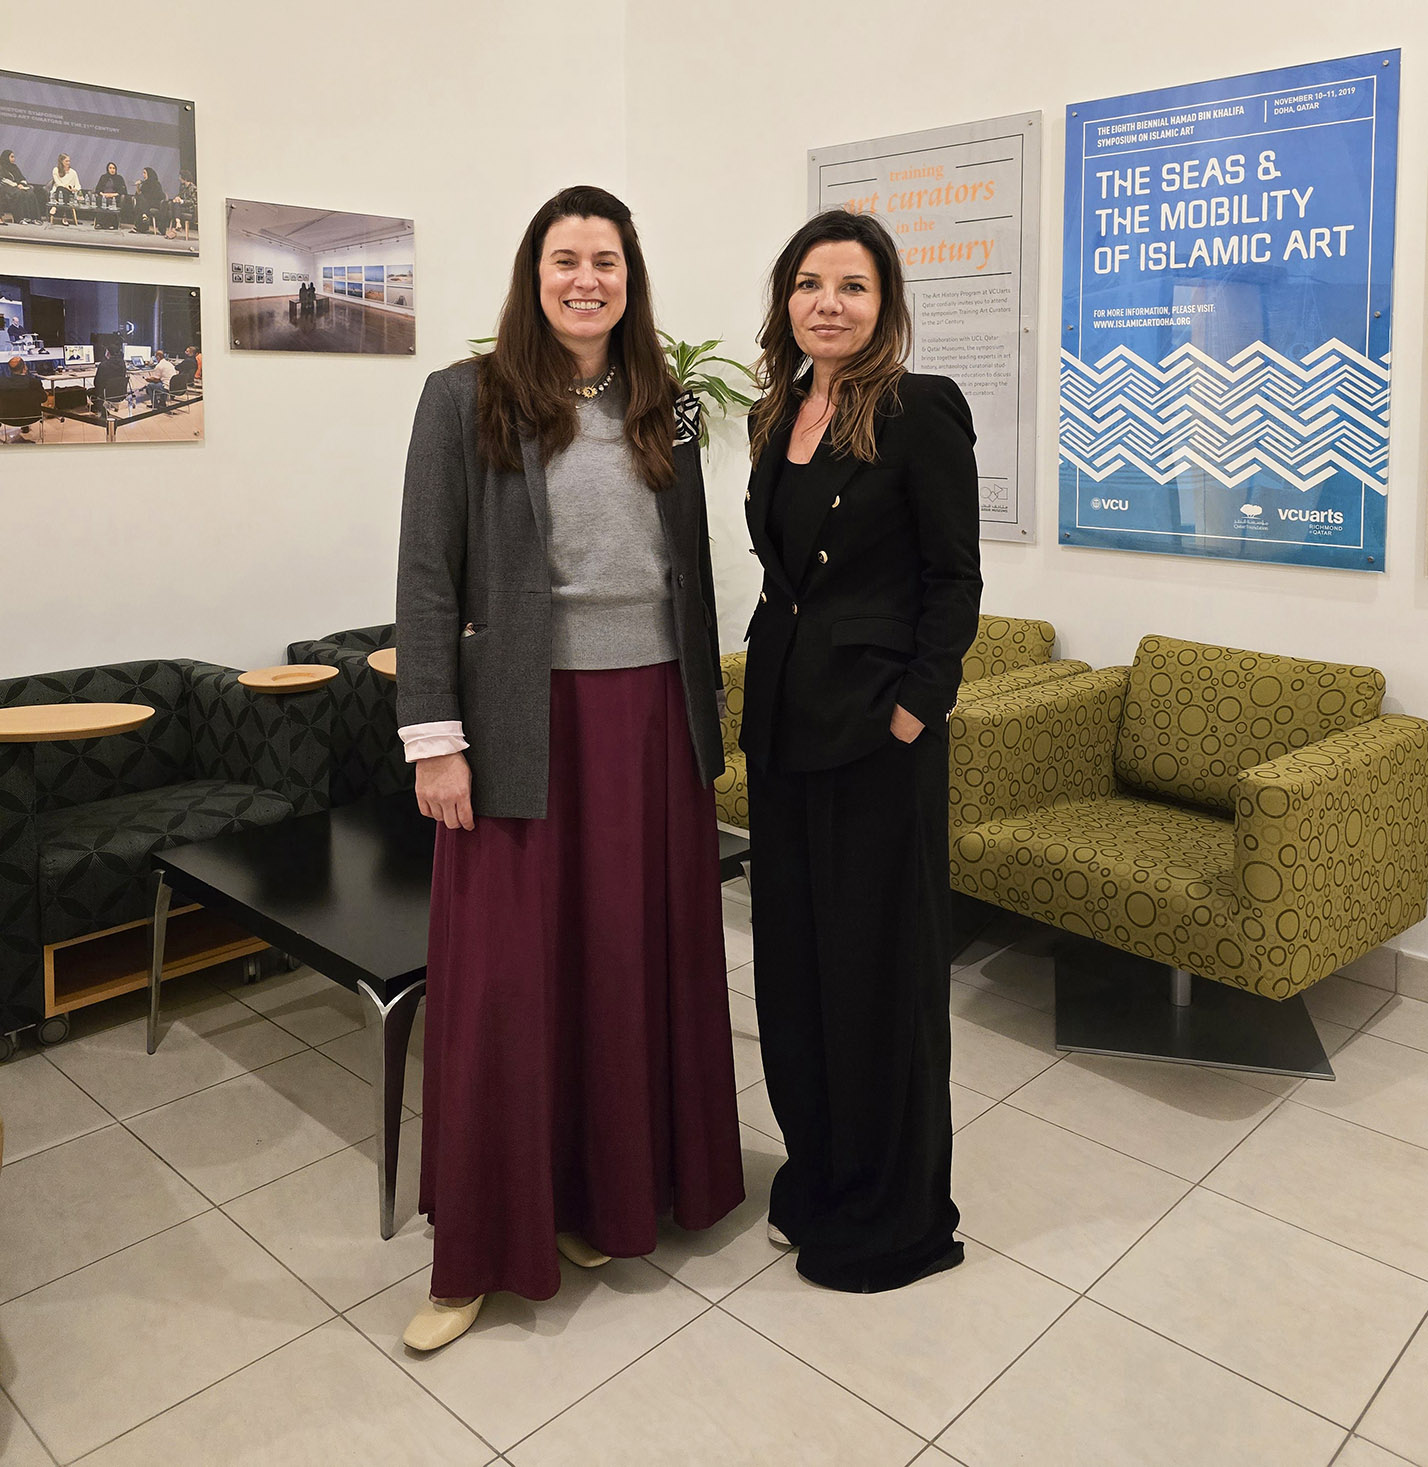 Jenny Maranca , the Art Collection Manager for the Alfardan Group , and Jennifer Bishop , the Representative Consultant for Christies in Qatar in the Art History offices 